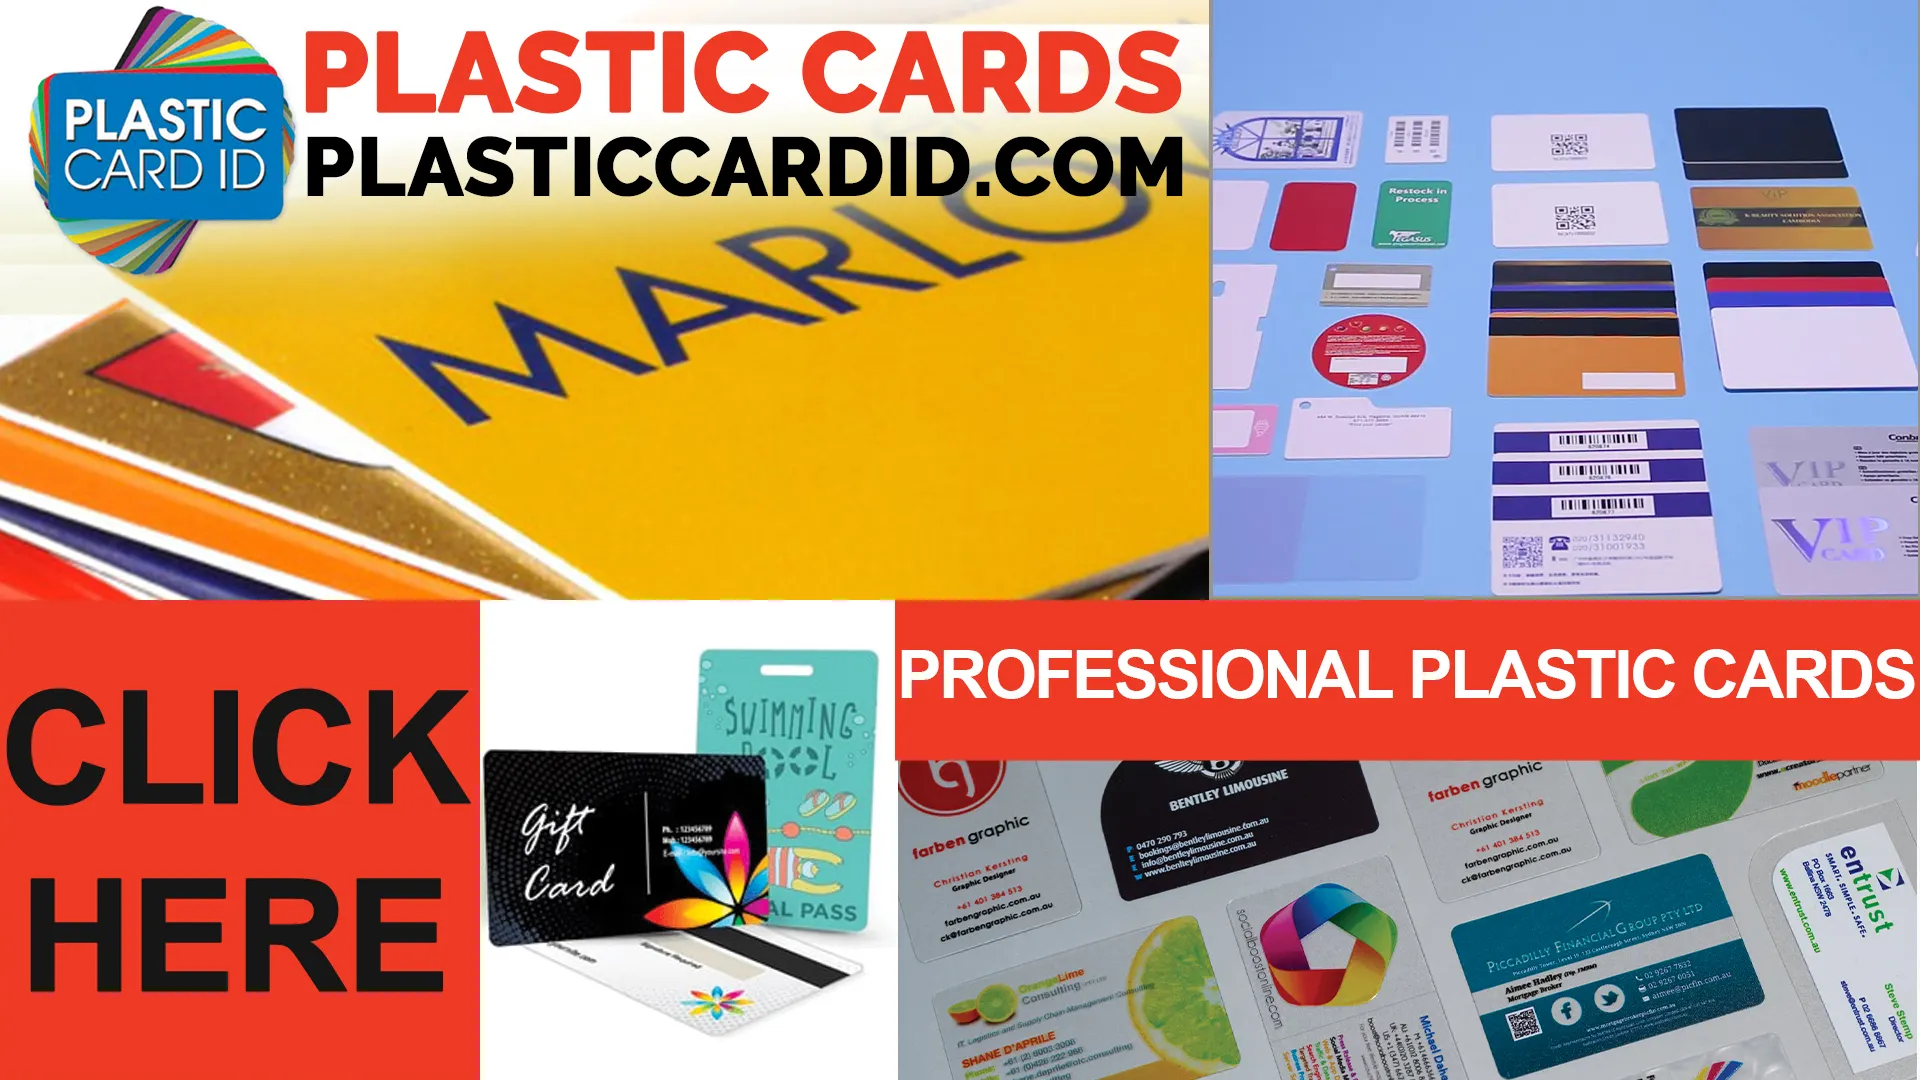 Welcome to Plastic Card ID
: Your Partner in Compliance for International Event Badges 